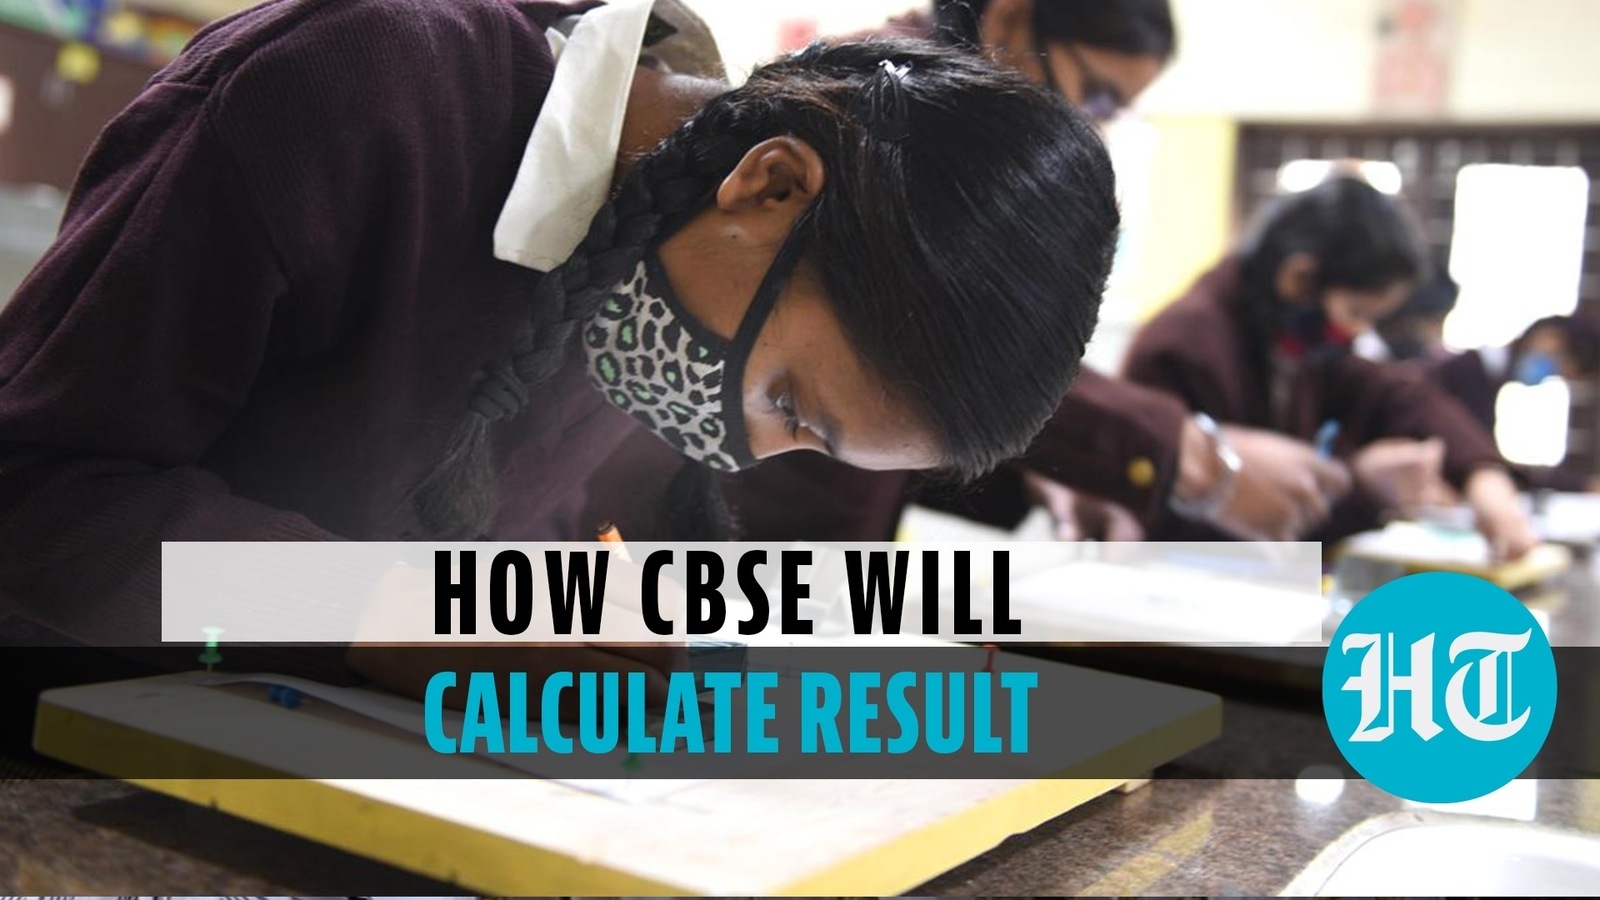 CBSE notifies policy for Class 12 evaluation, results by July 31